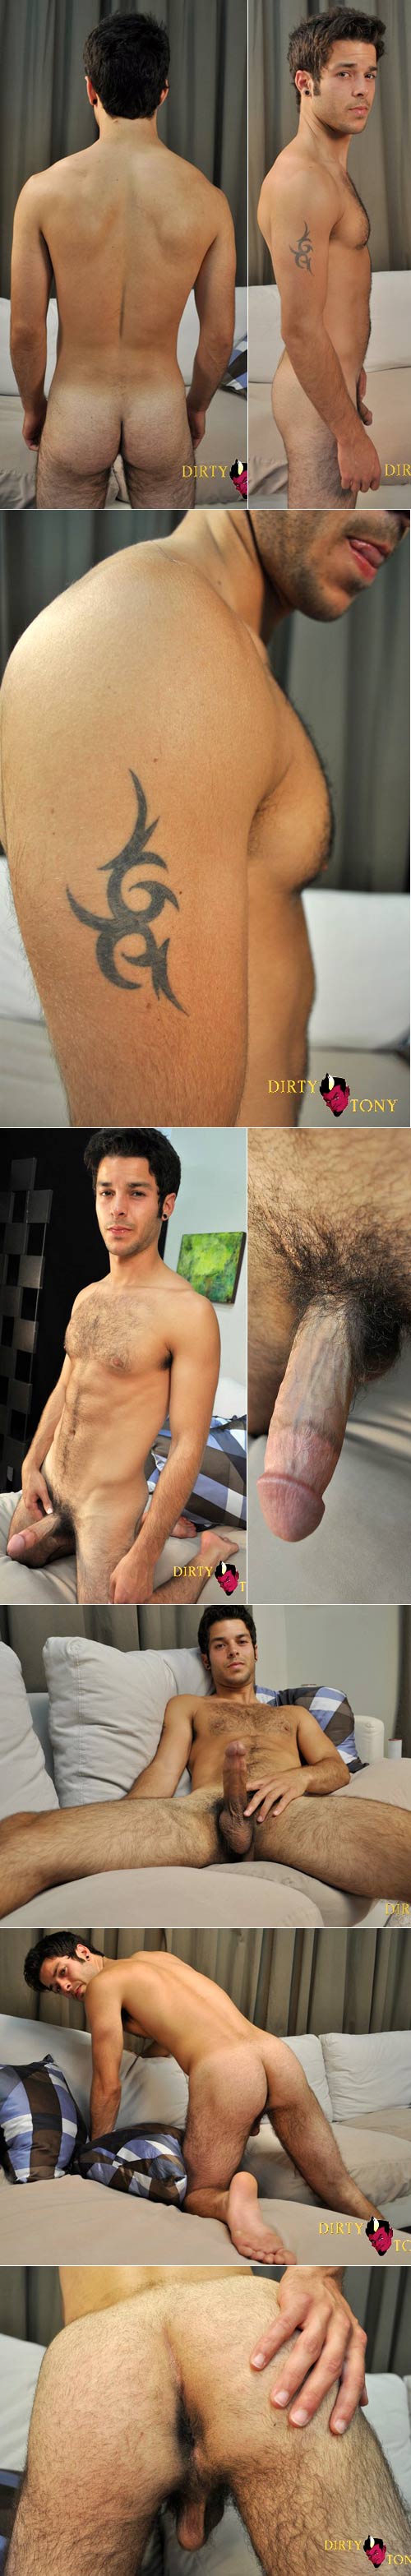 Diego Gets A Hand at DirtyTony